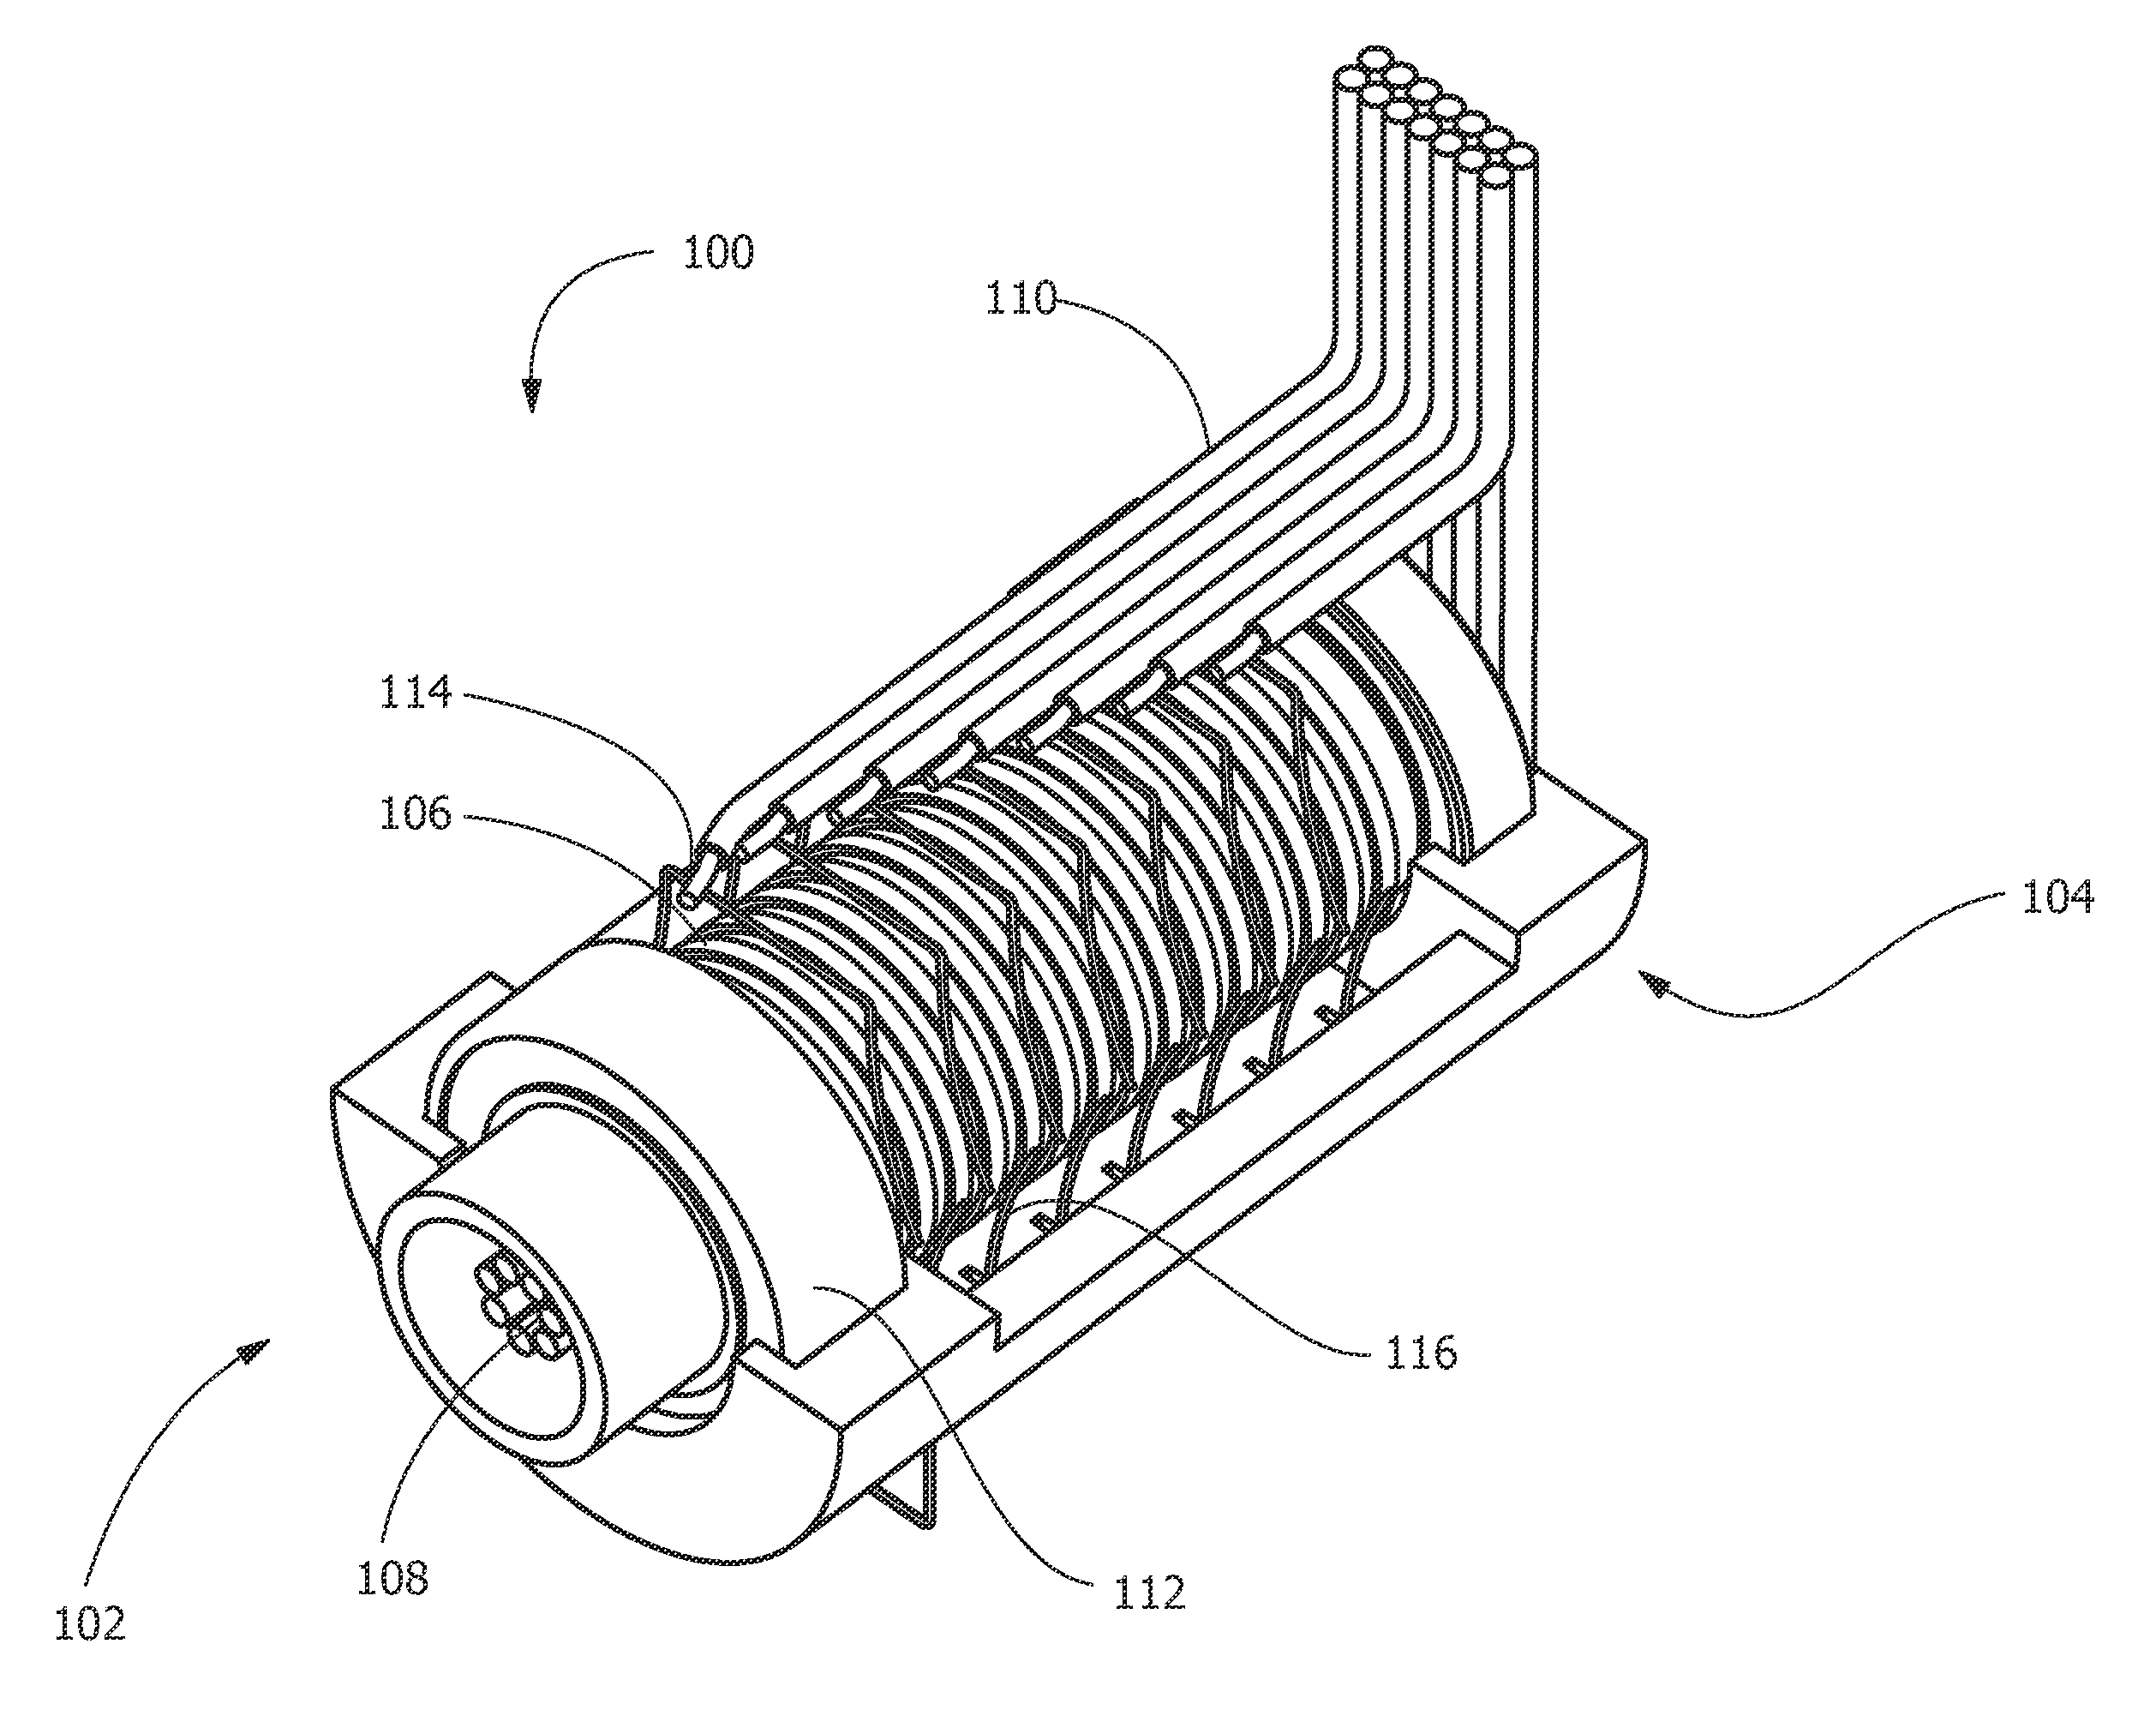 Process of fabricating a slip ring component, a slip ring component and molded interconnect device including a slip ring component